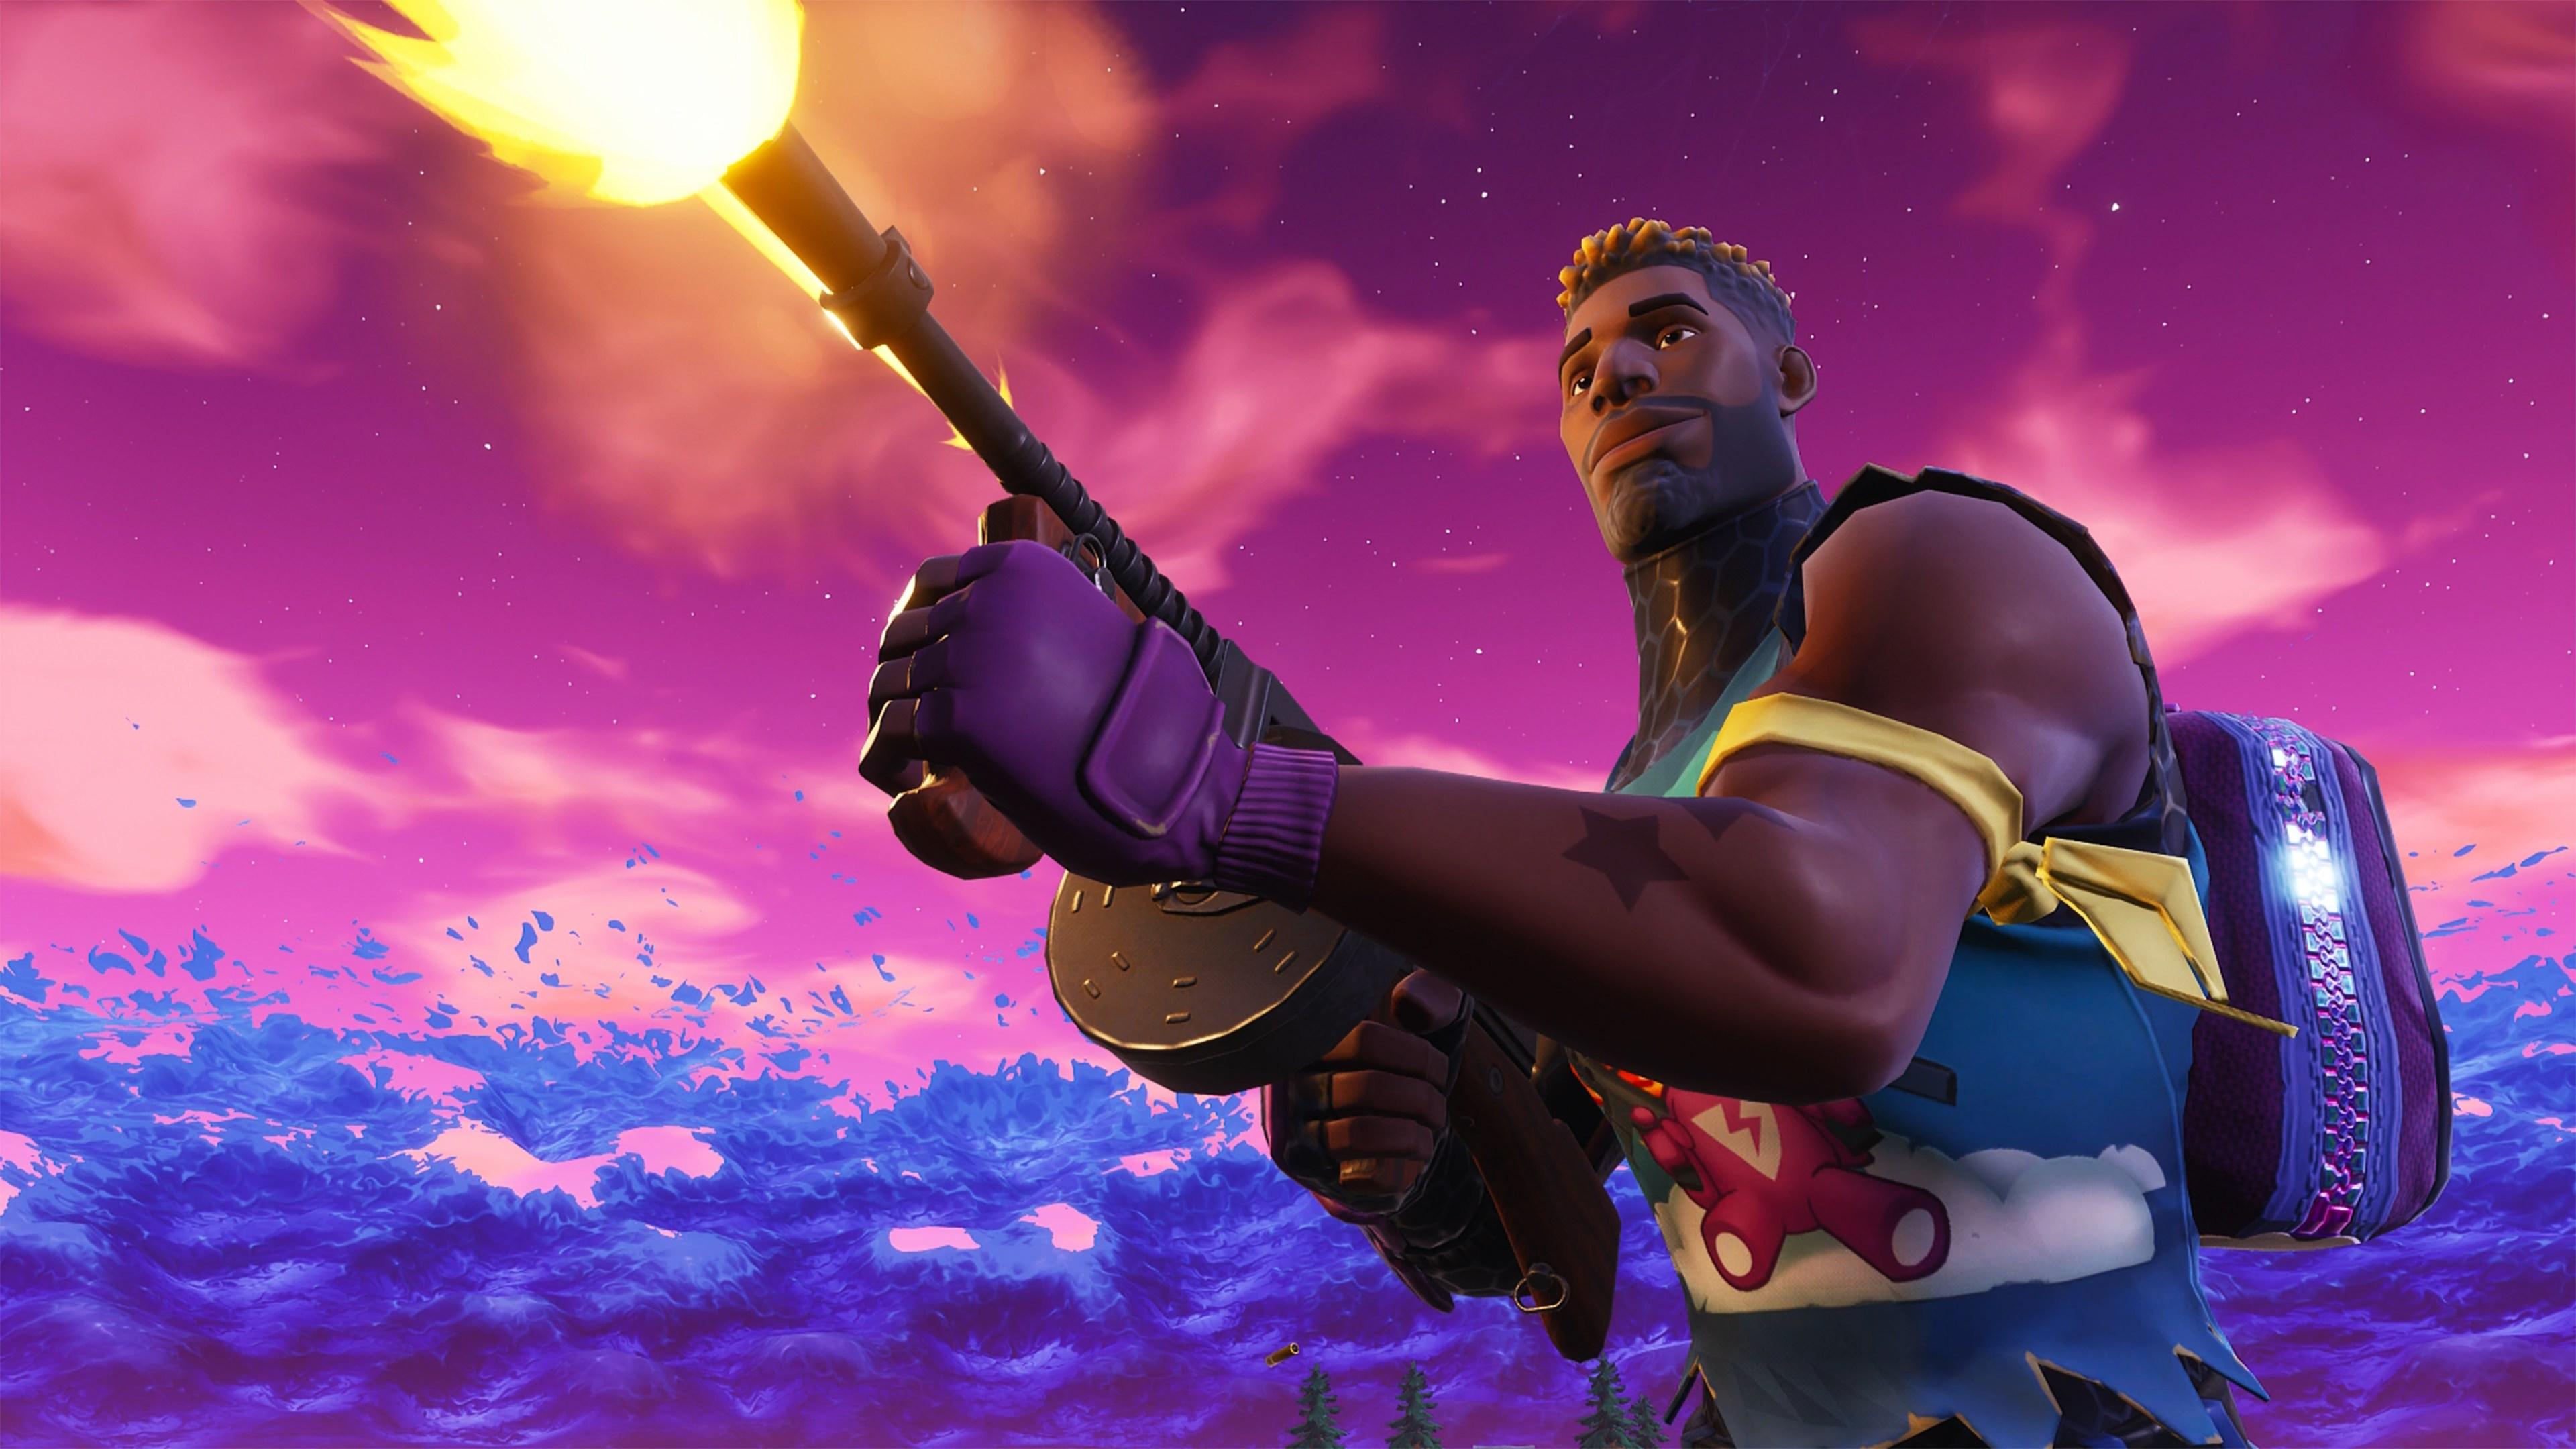 3840 x 2160 · jpeg - Fortnite Battle Royale Mobile 4k ps games wallpapers, hd-wallpapers ...